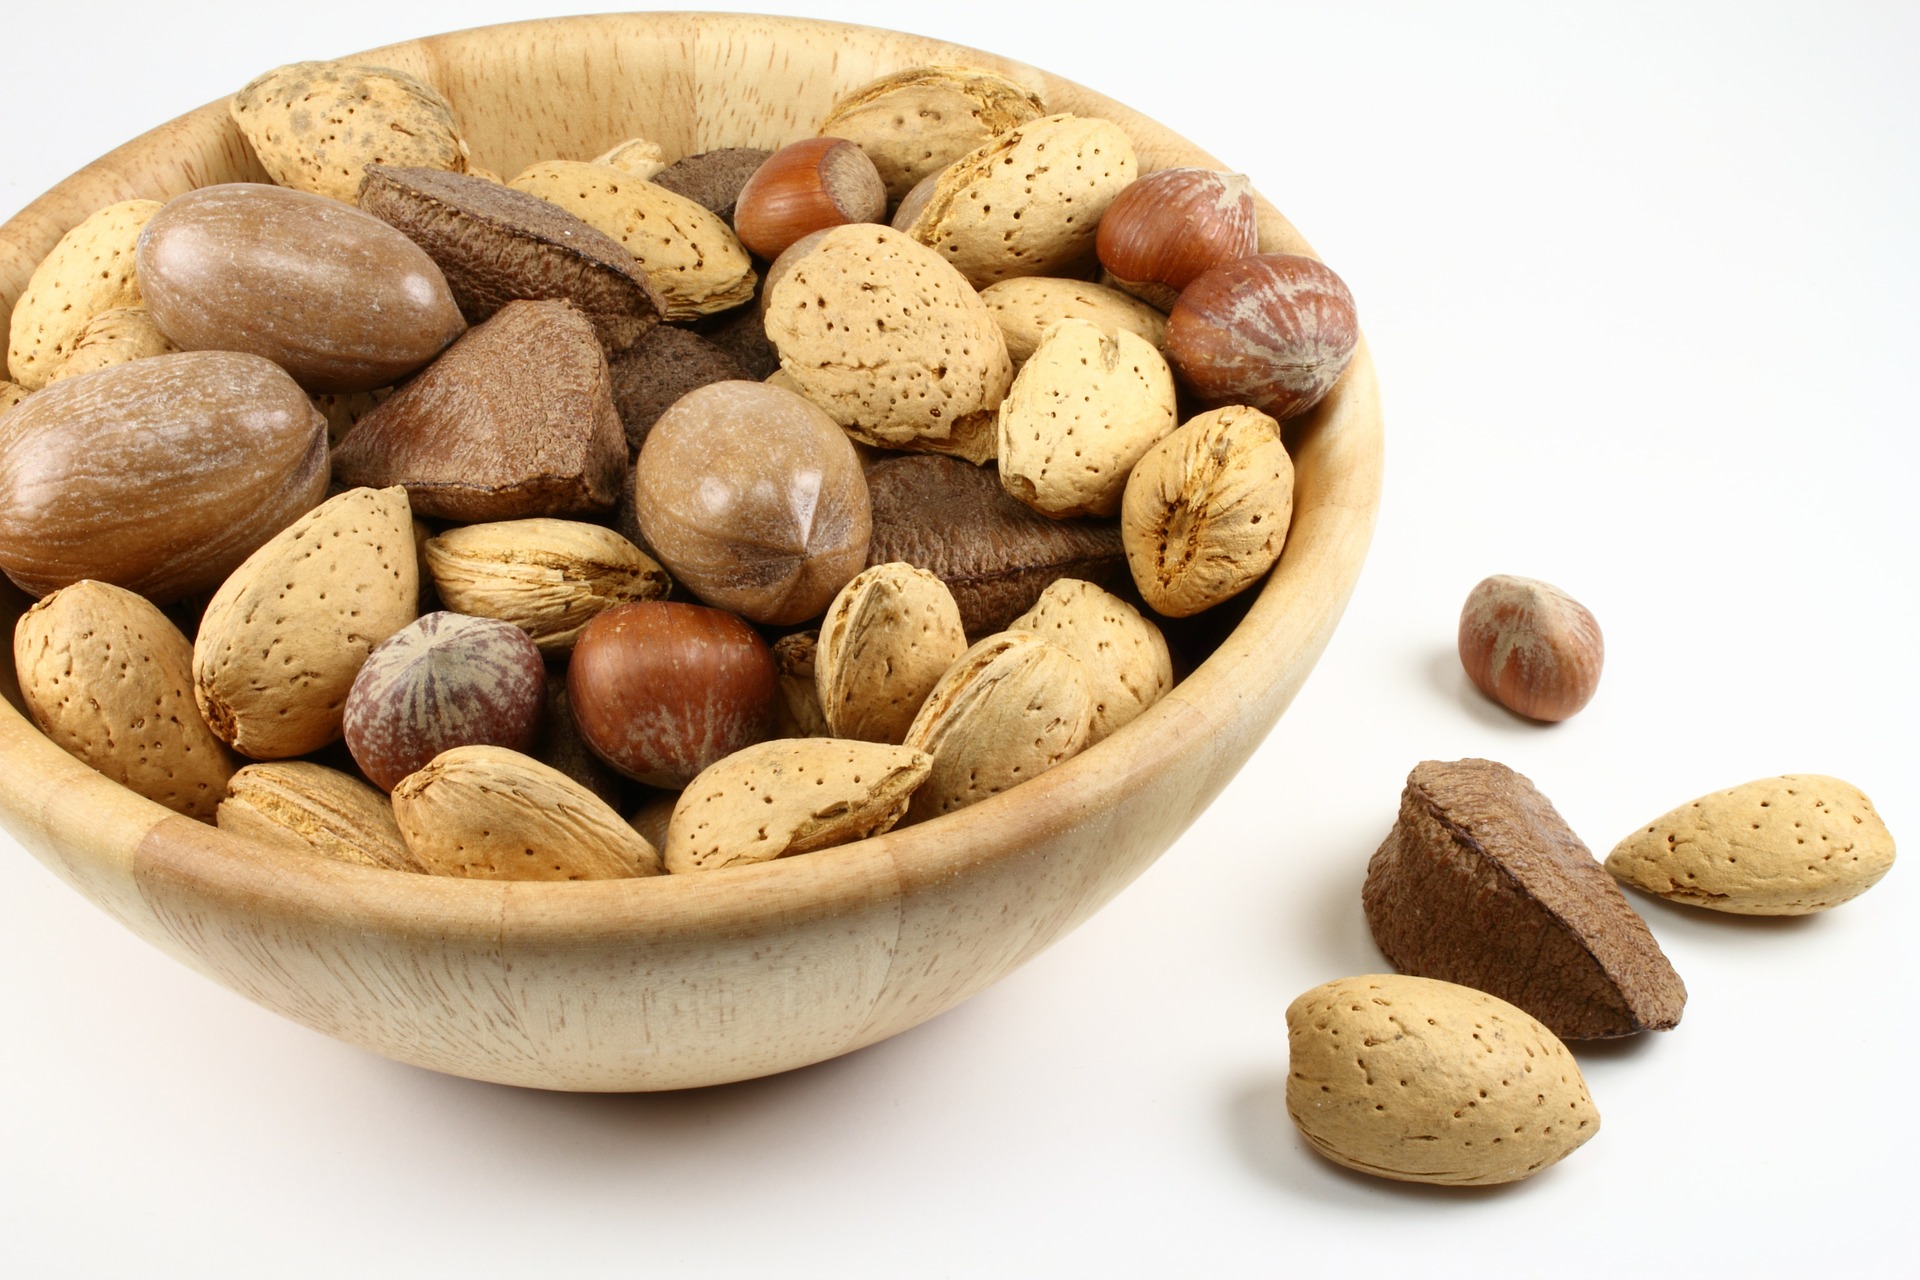 Nuts, peanuts & co: which and how much to eat?